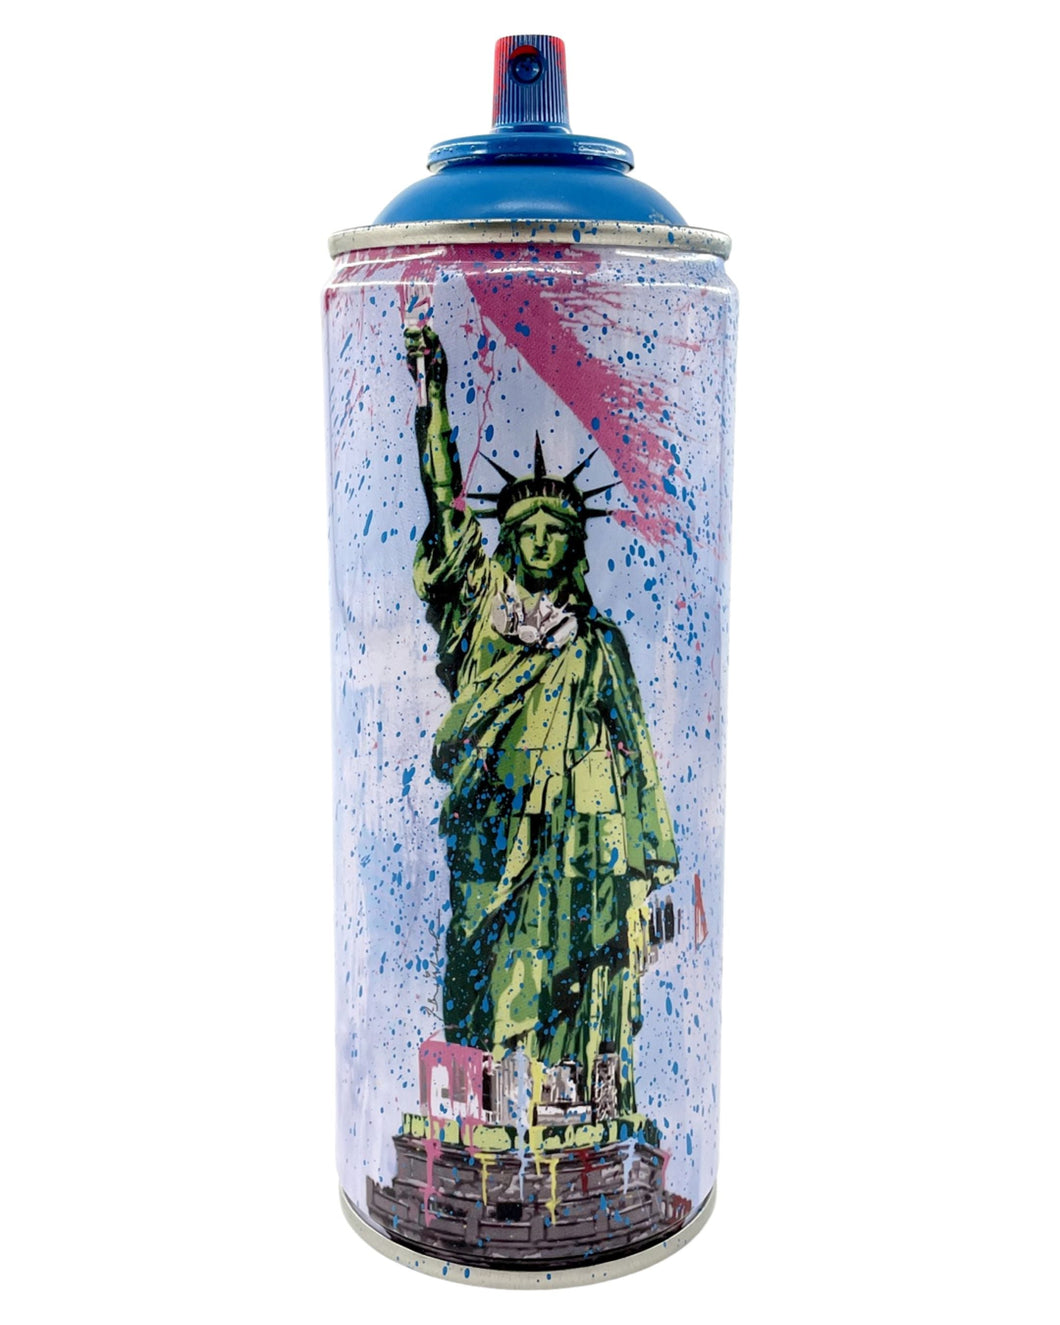 Liberty (Hand Finished) Spray Can Spray Paint Can Mr. Brainwash